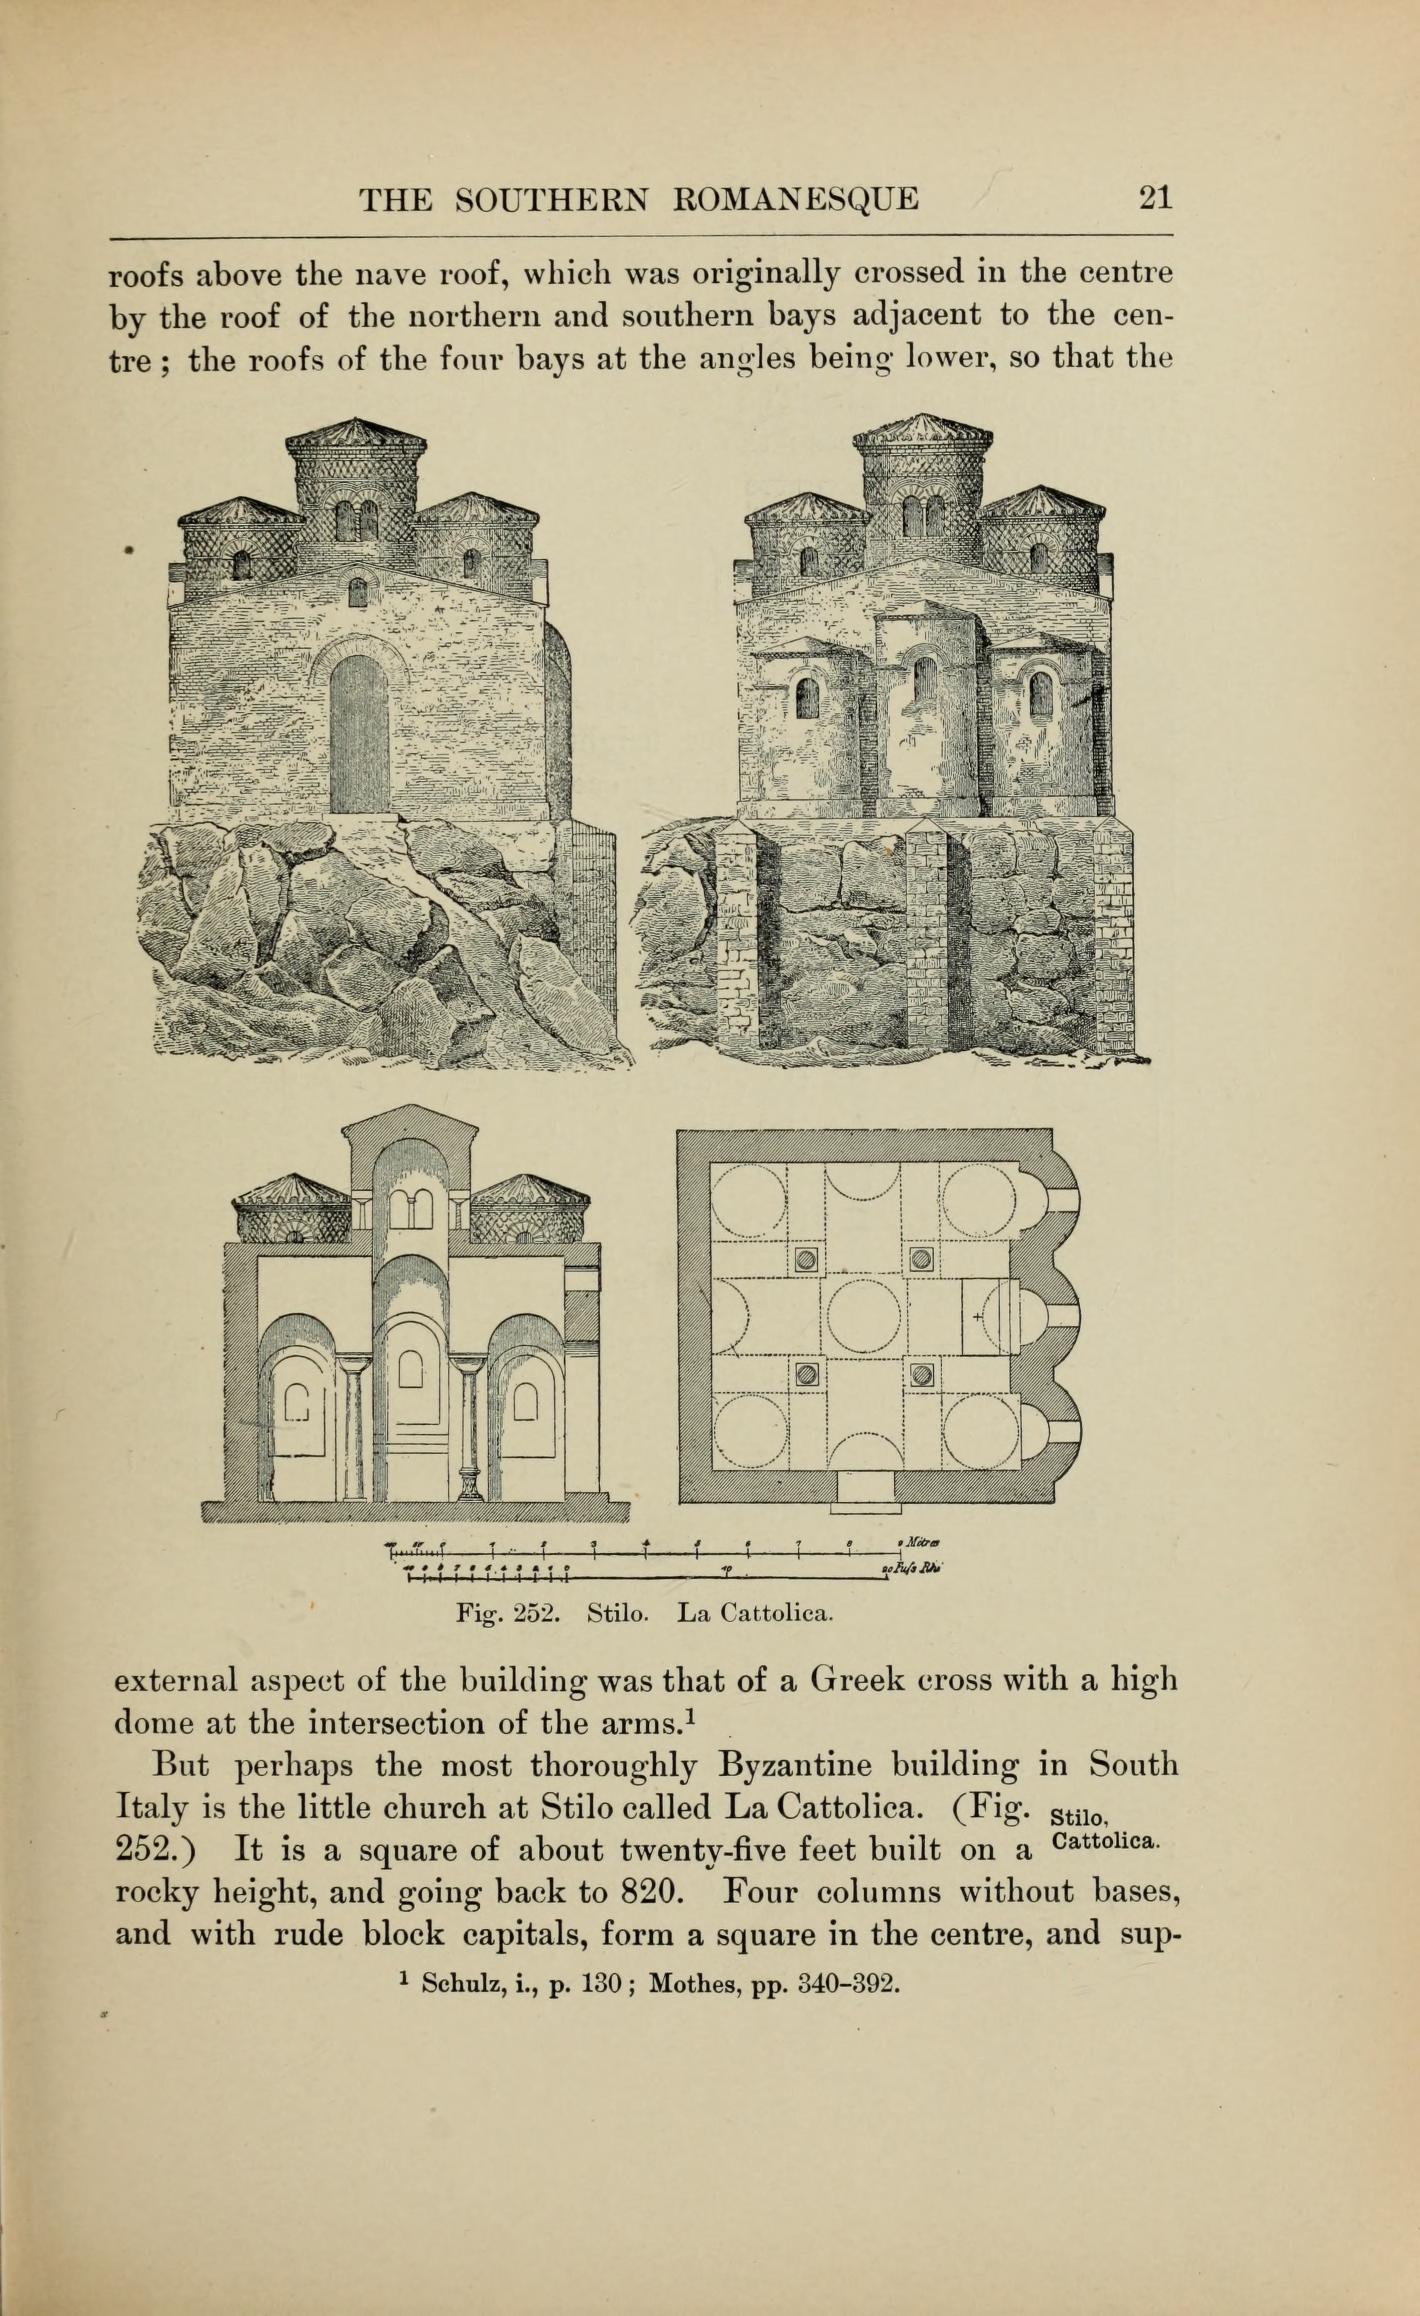 Charles A. Cummings, A history of architecture in Italy from the time of Constantine to the dawn of the renaissance, 1901